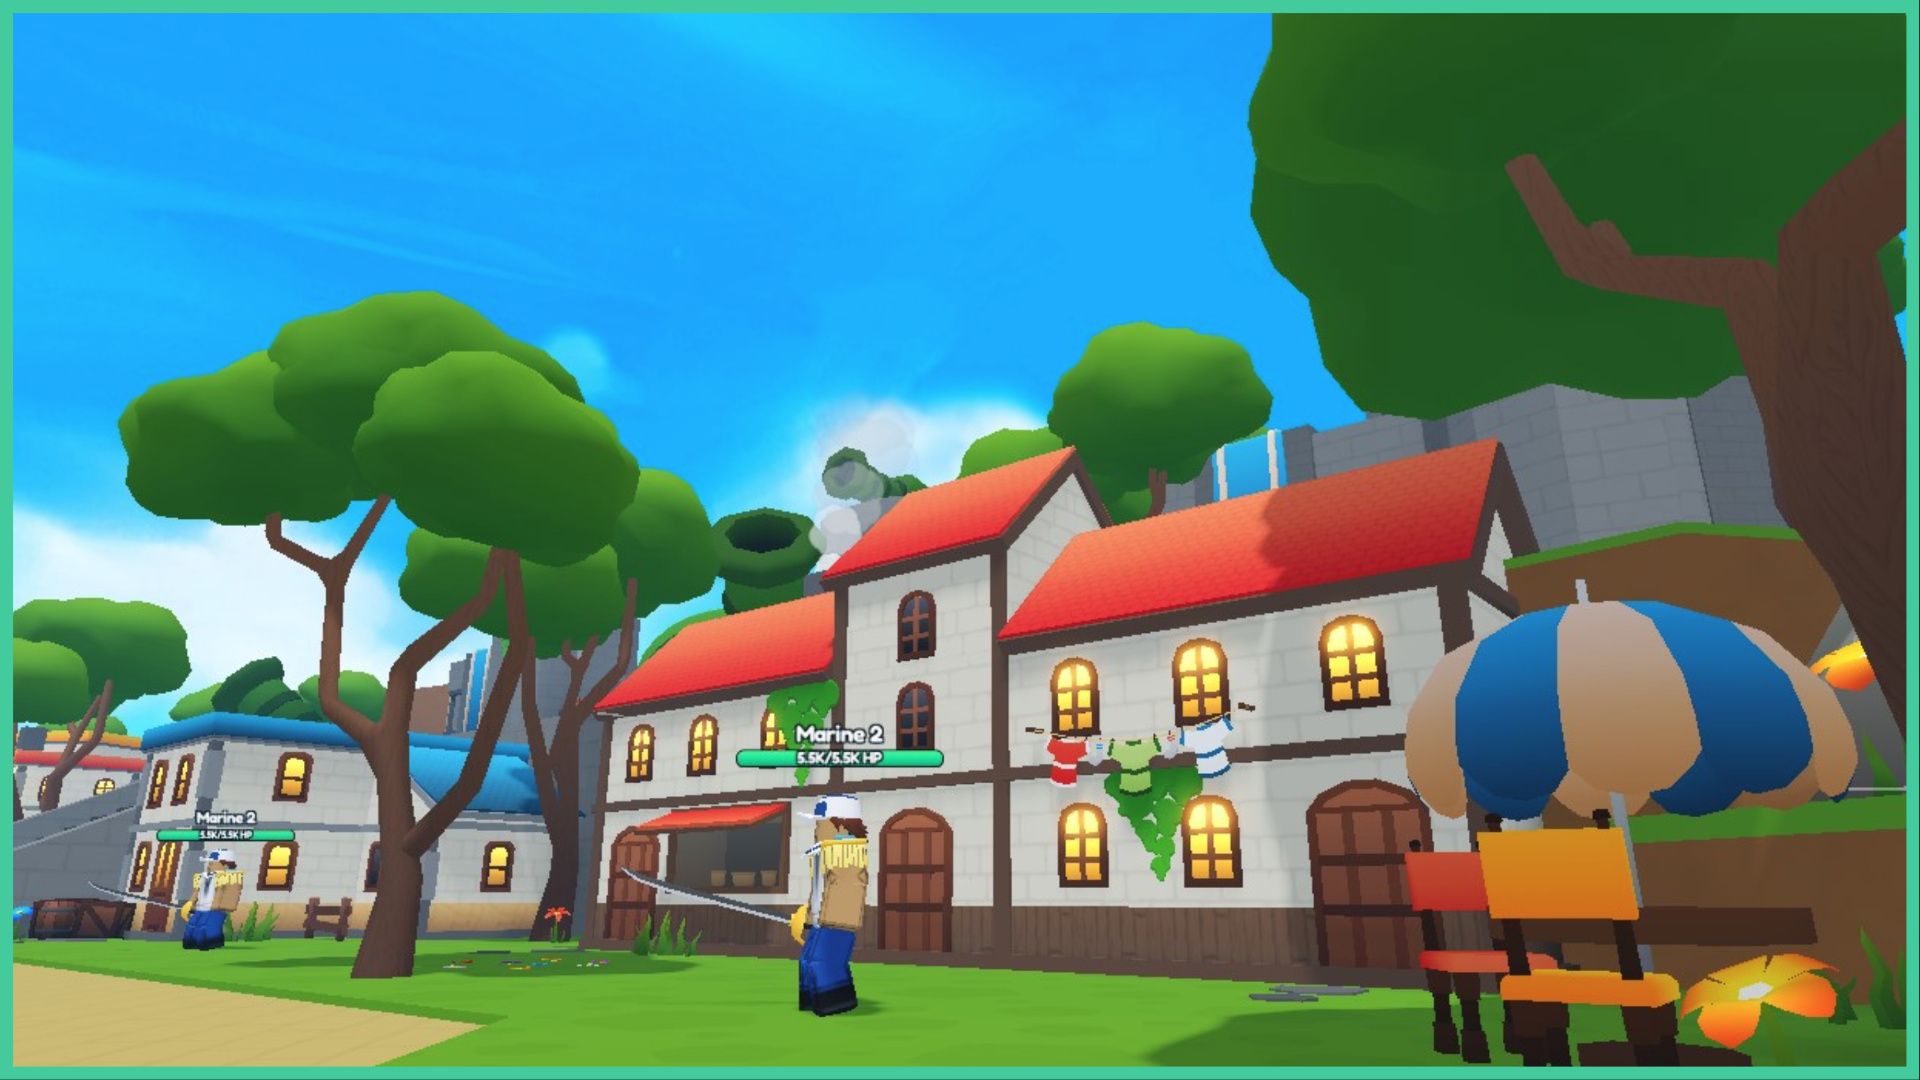 feature image for our anime champions simulator blue egg guide, the image features a screenshot from the pirate town with a building that has a clothing line outside two windows that are lit, there is also a table and chairs outside with an umbrella to protect from the shade, while a marine NPC holding a sword stands guard outside, the building is surrounded by tall trees